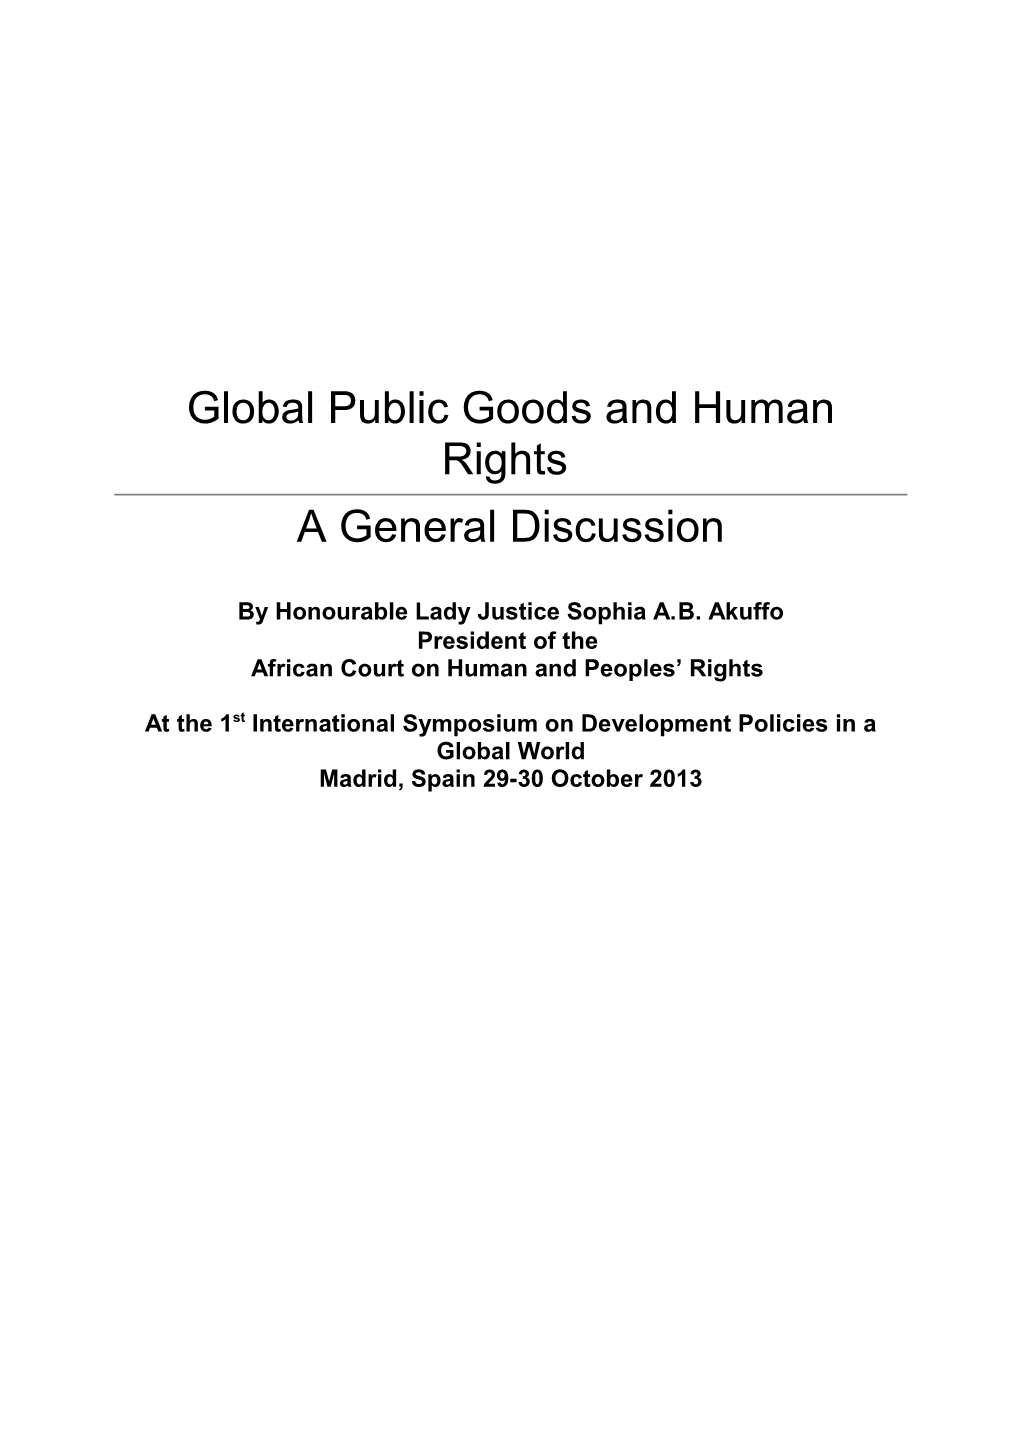 Global Public Goods And Human Rights